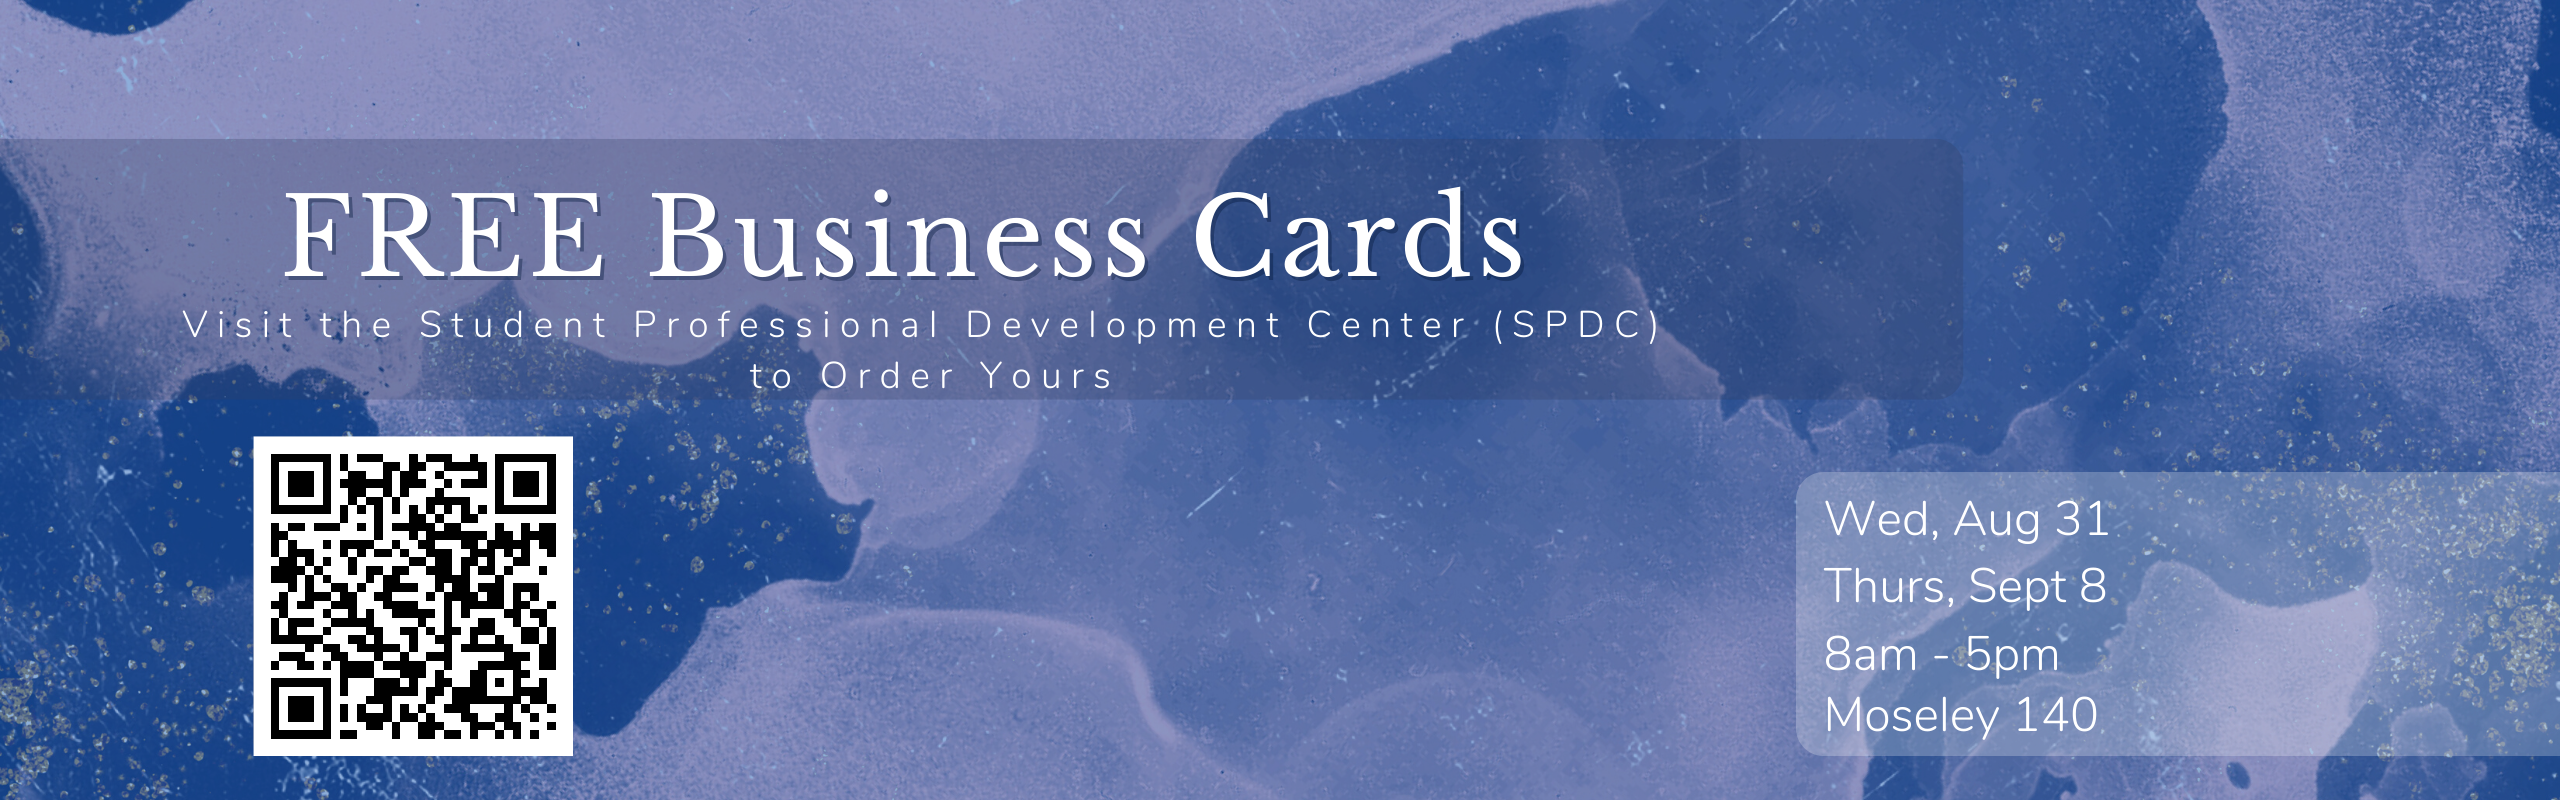 Free business cards available. Check EJN for more details